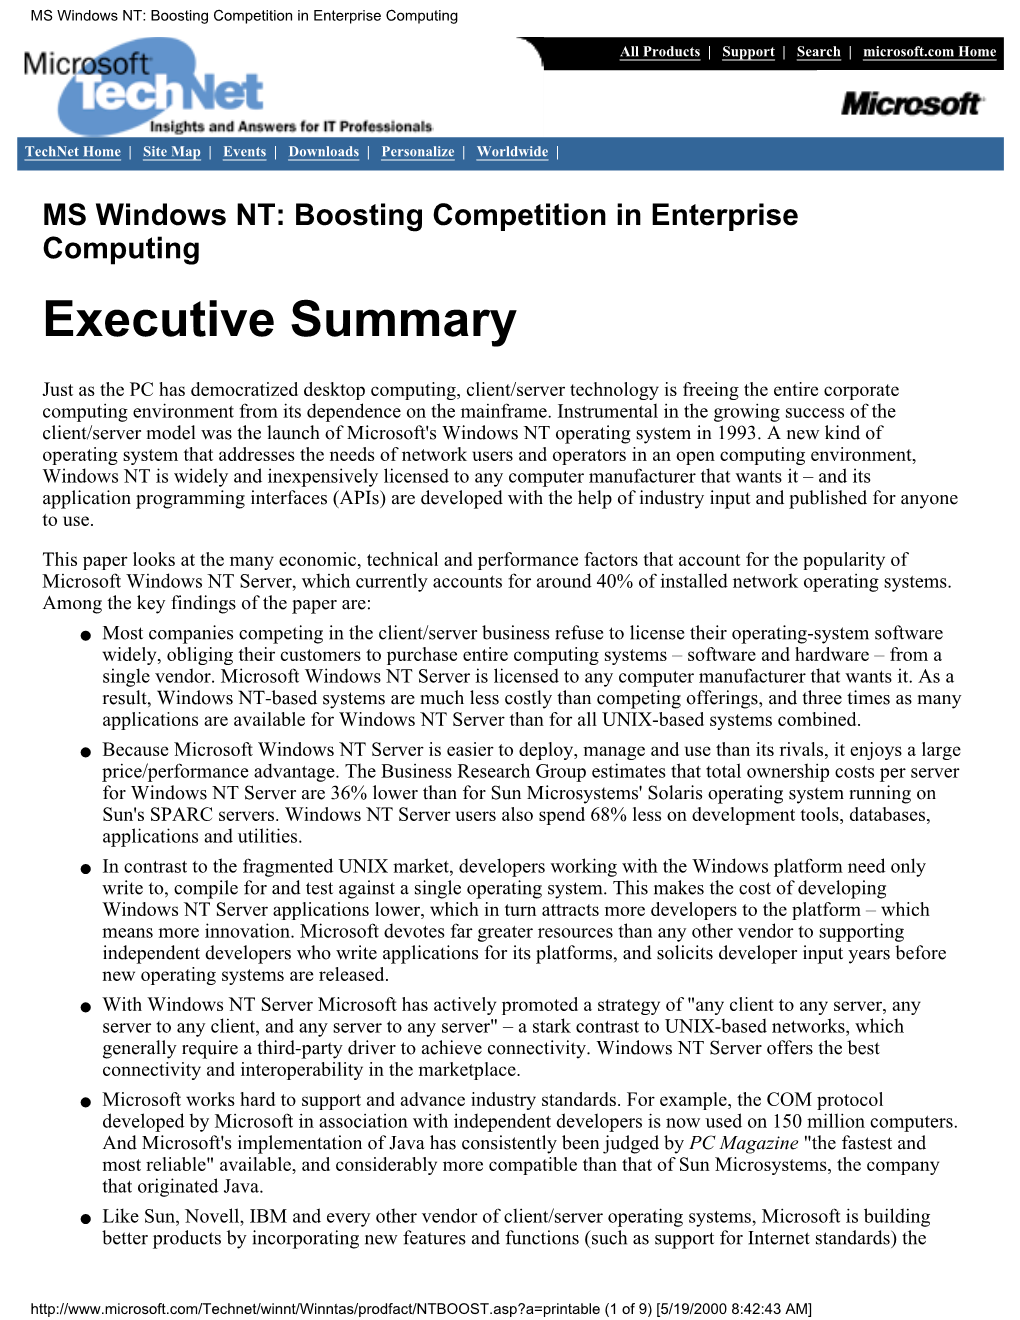 Microsoft Technet Article: MS Windows NT: Boosting Competition